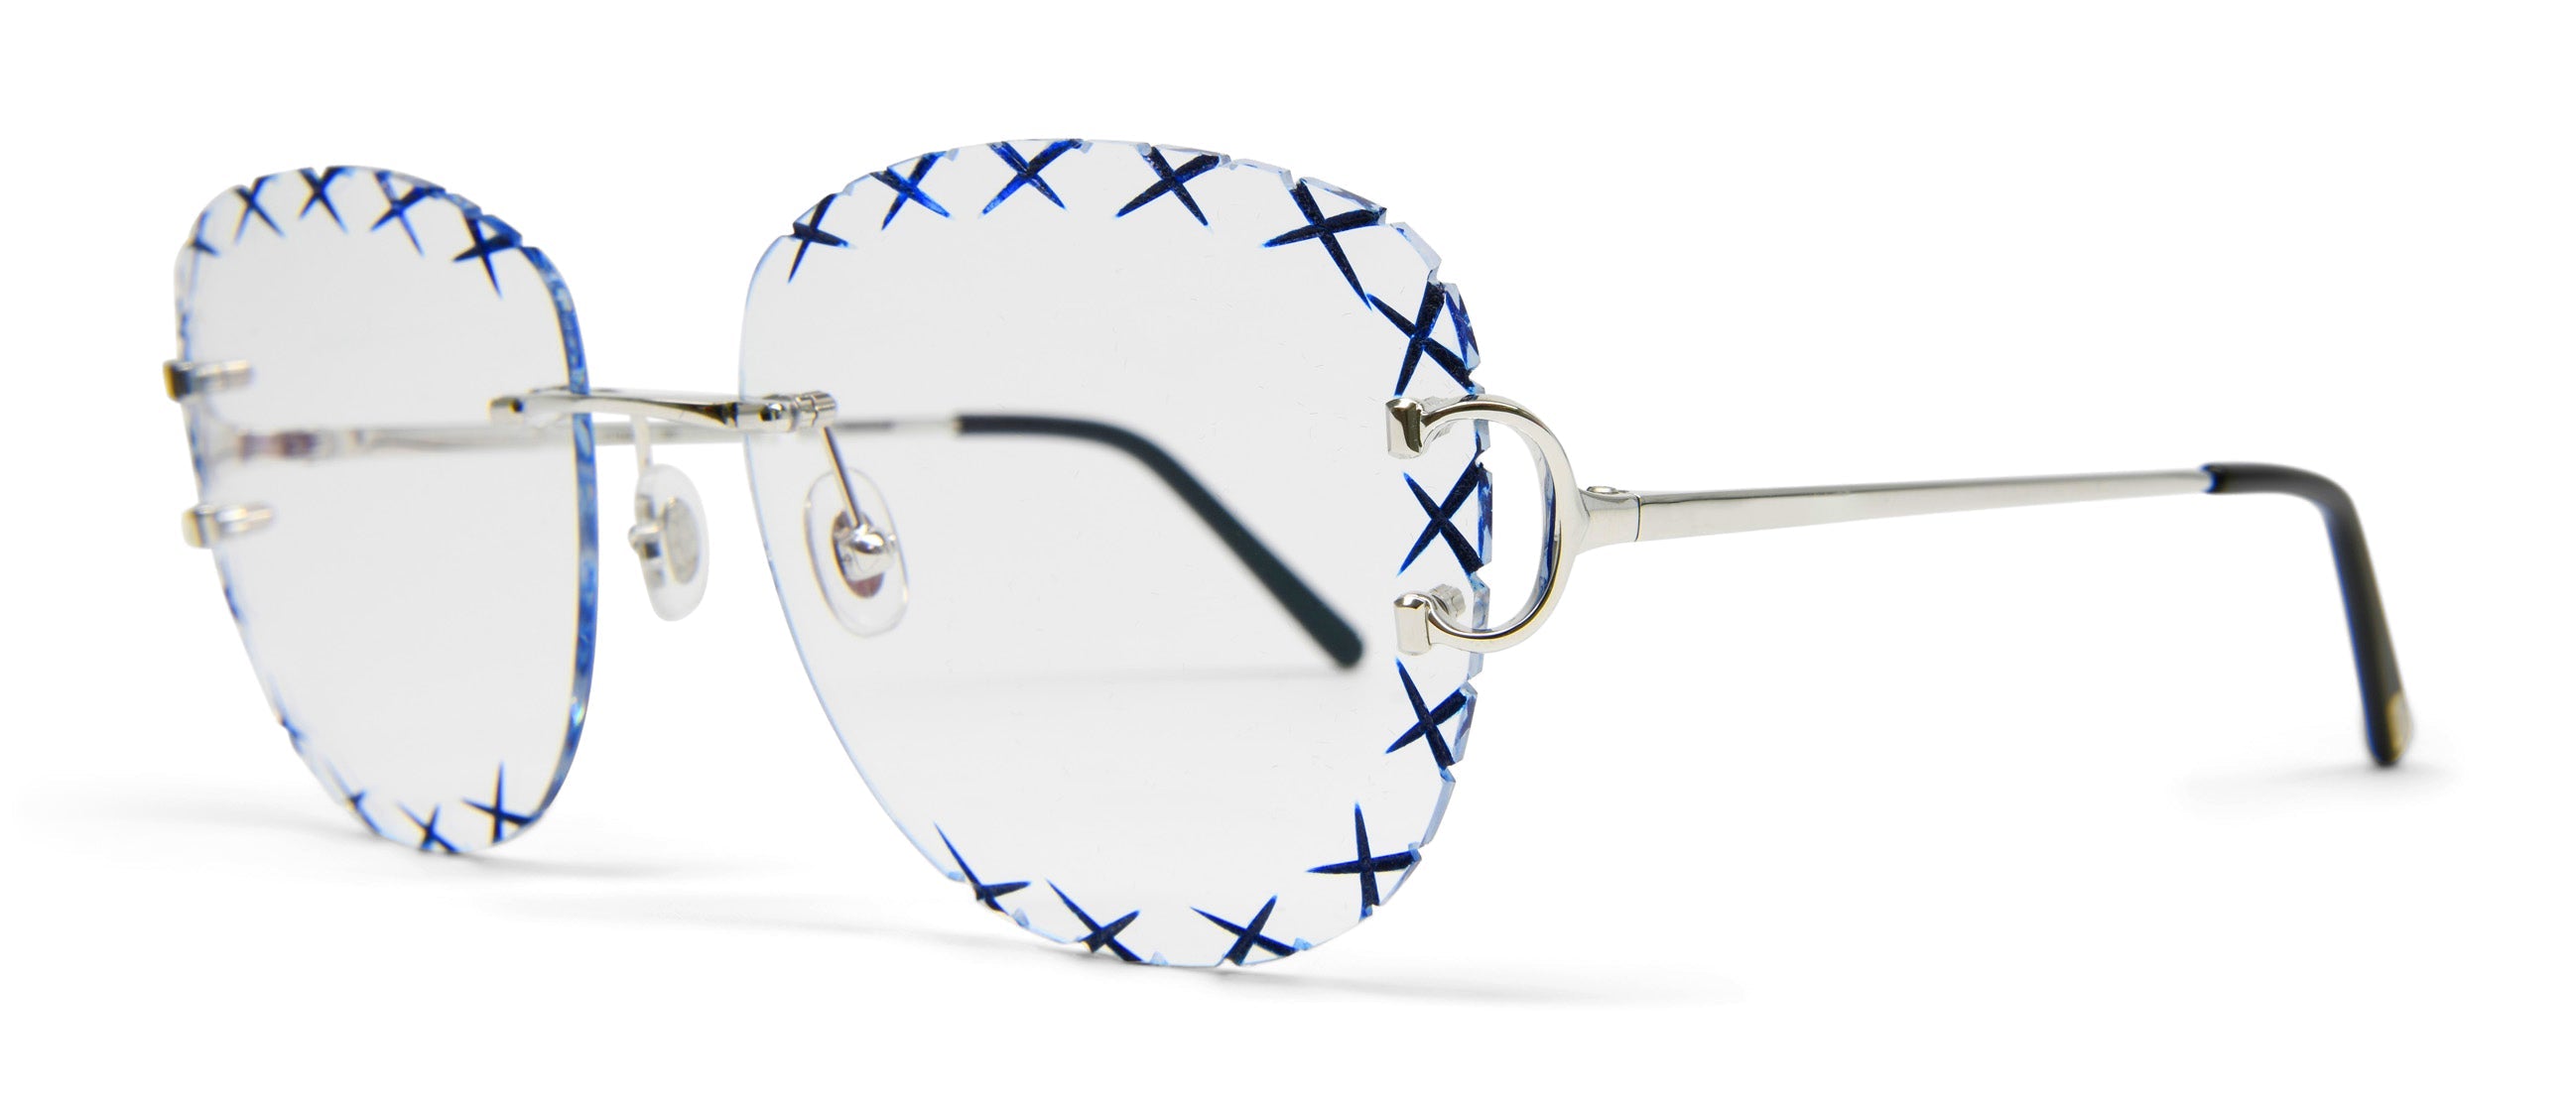 lv party glasses